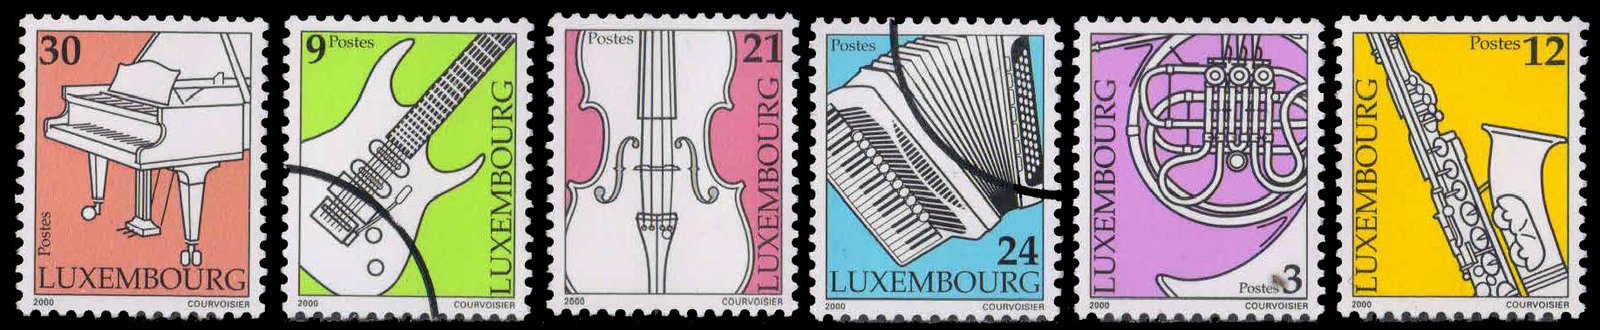 LUXEMBOURG 2000-Musical Instruments, SPECIMEN, Set of 6, MNH, S.G. 1523-28-Cat £ 15-